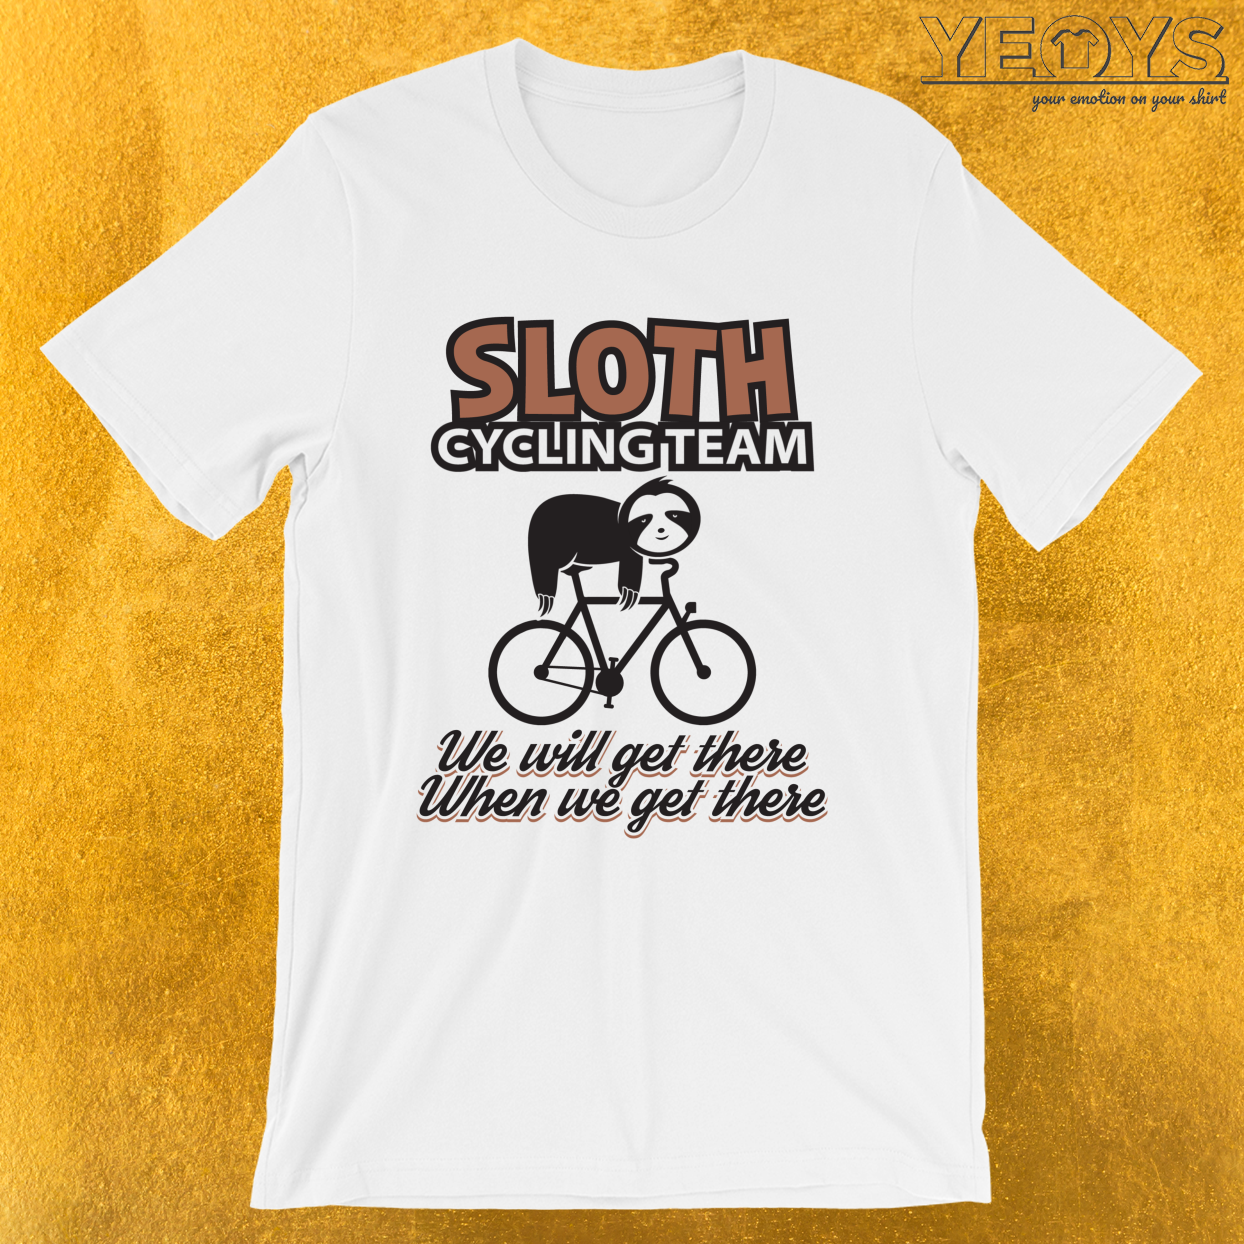 We Will Get There When We Get There – Sloth Cycling Team Tee